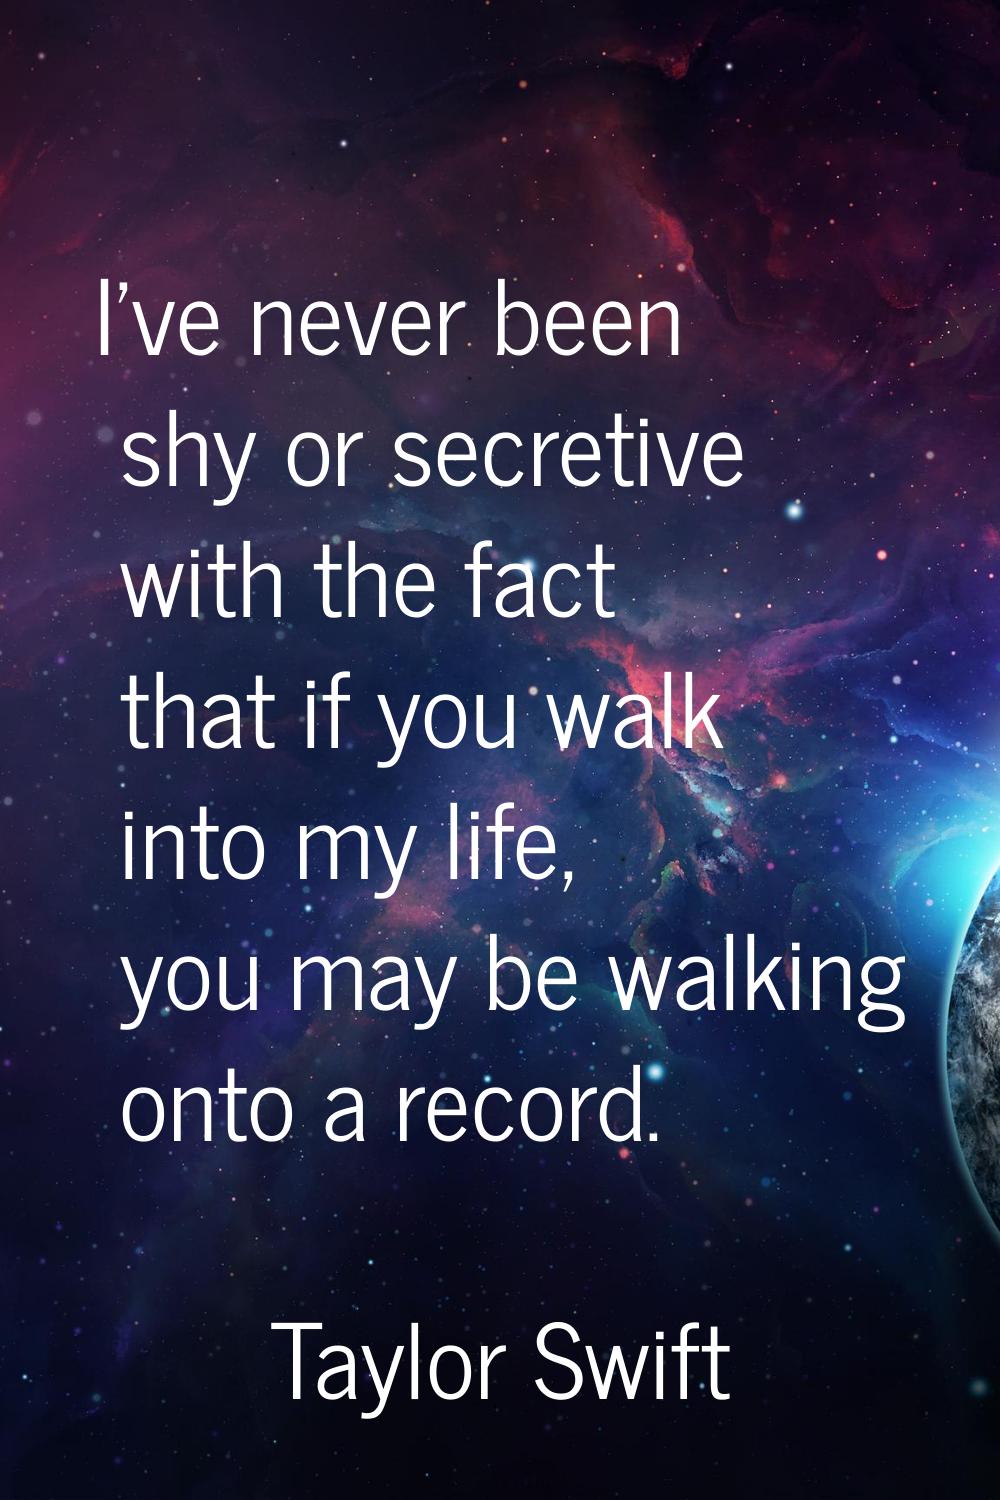 I've never been shy or secretive with the fact that if you walk into my life, you may be walking on